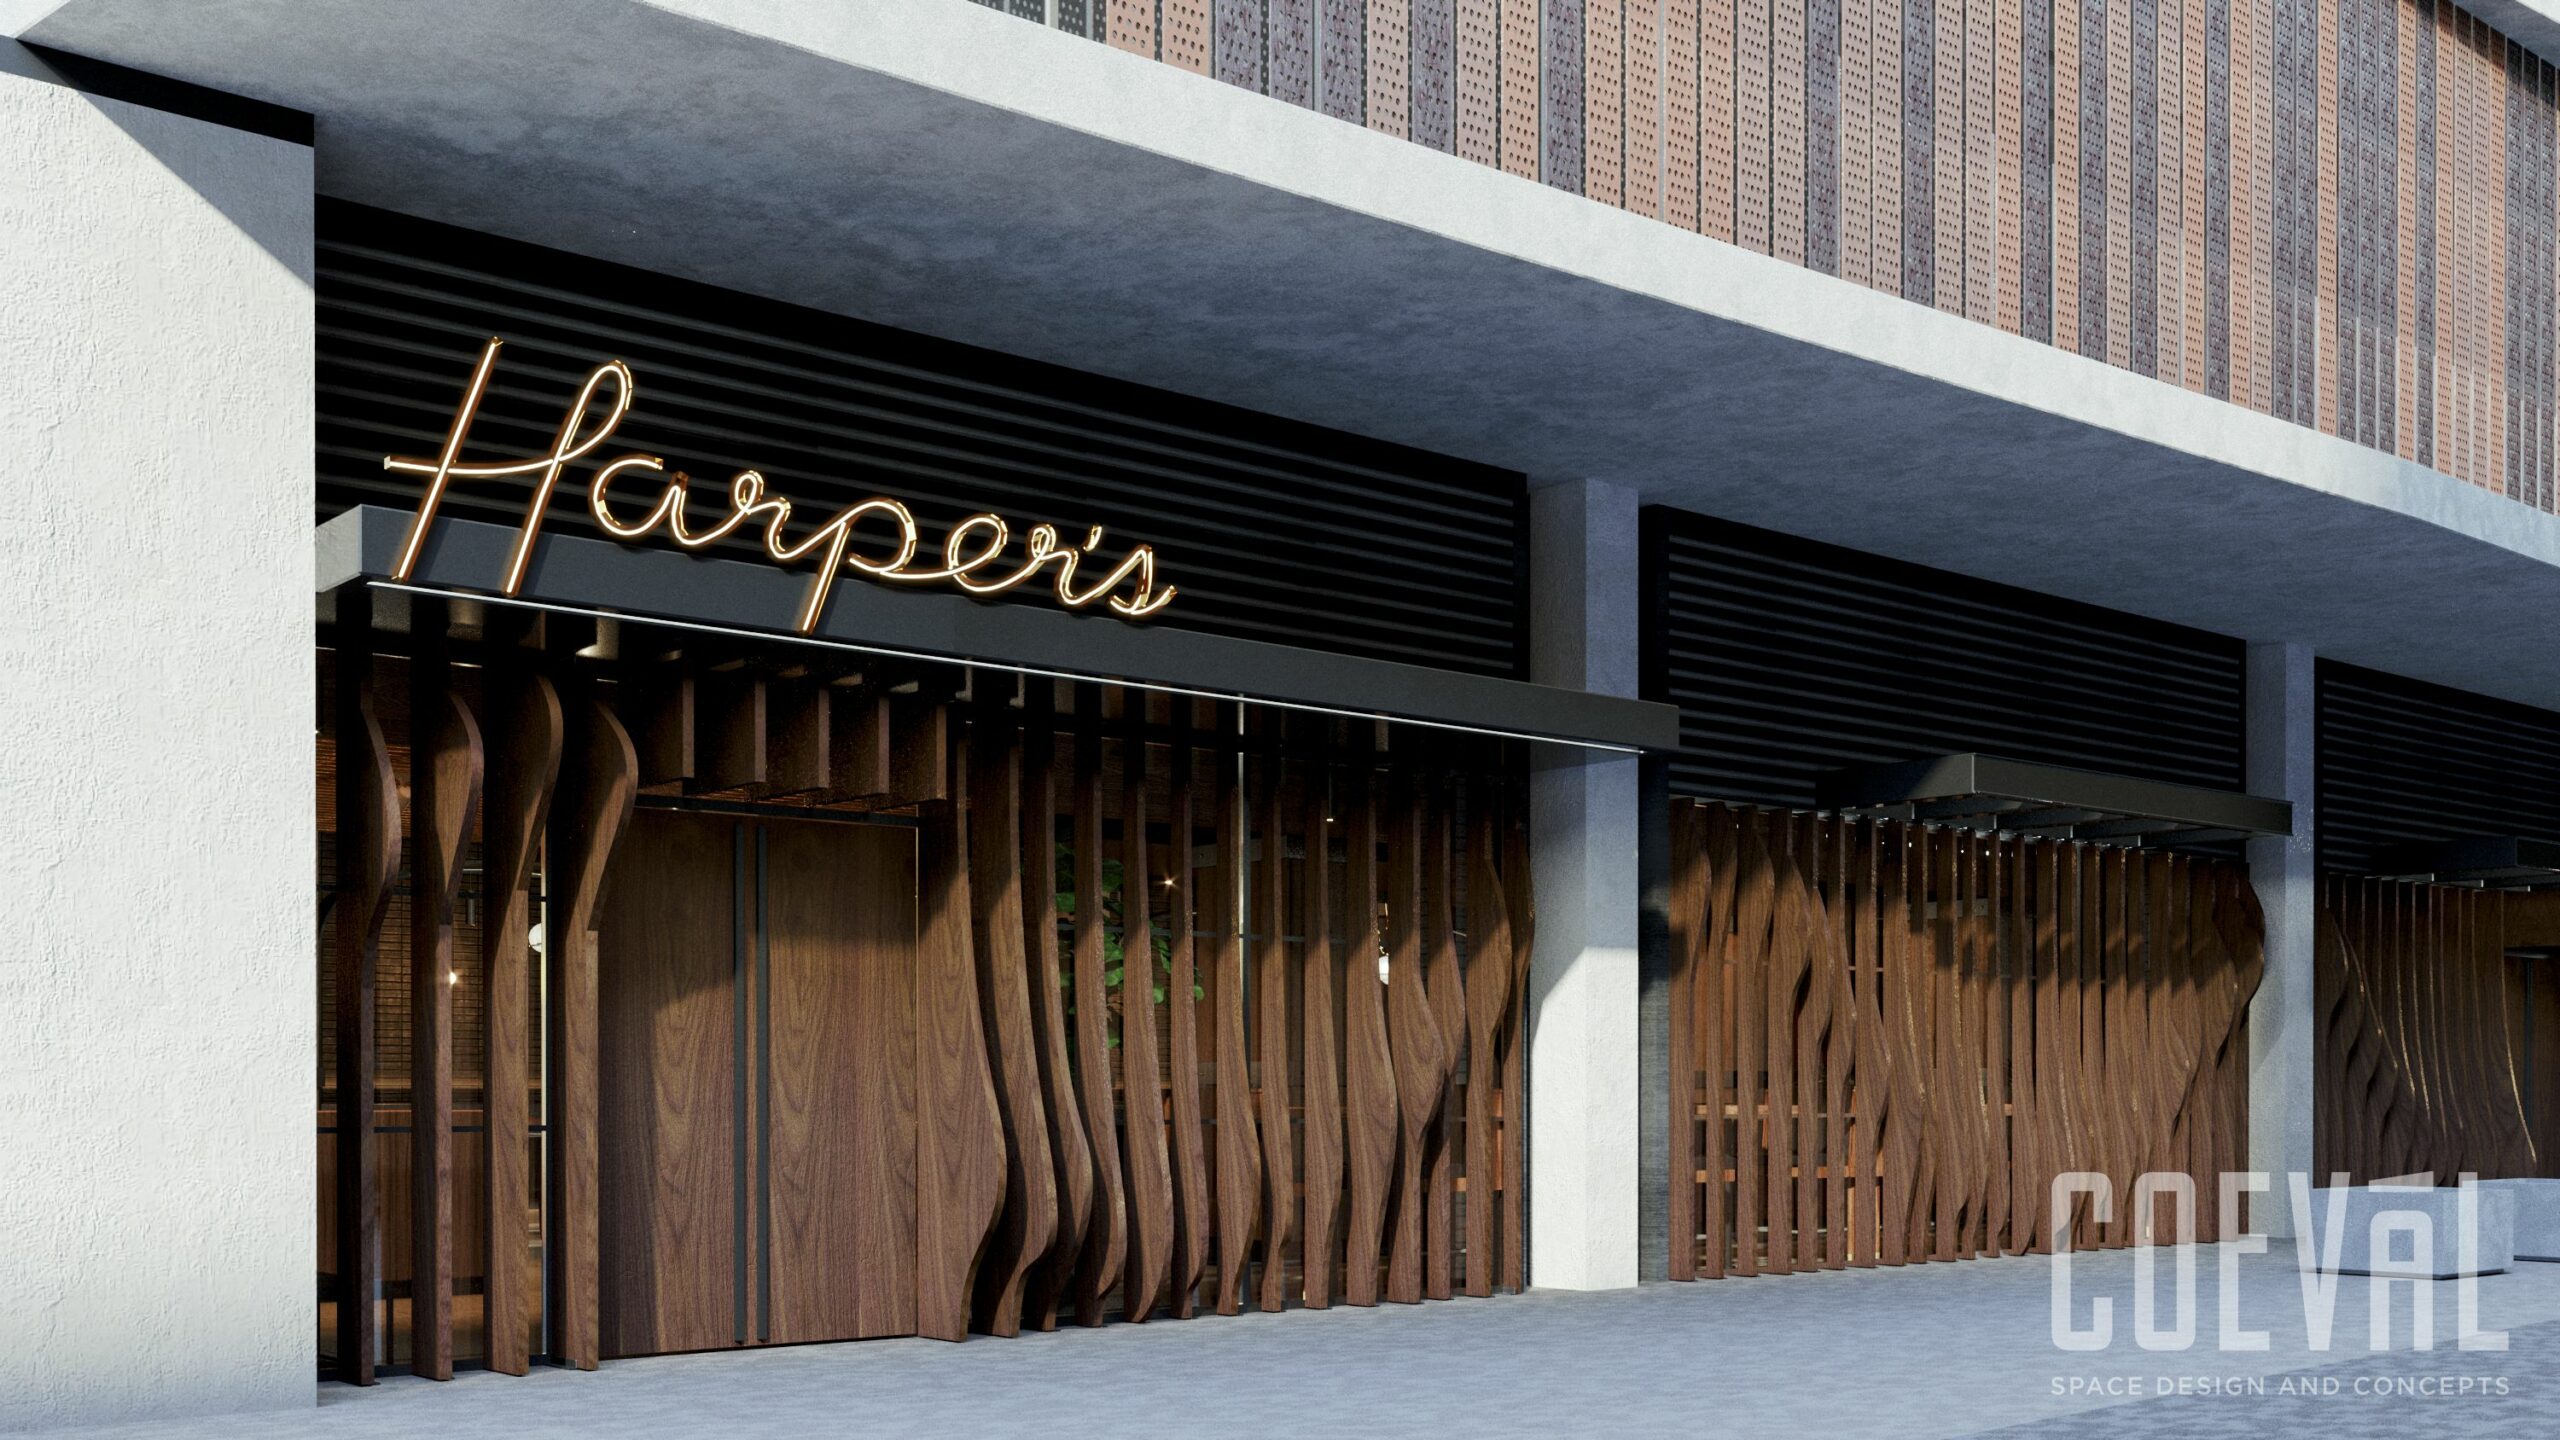 A rendering of an exterior restaurant facade, with the name 